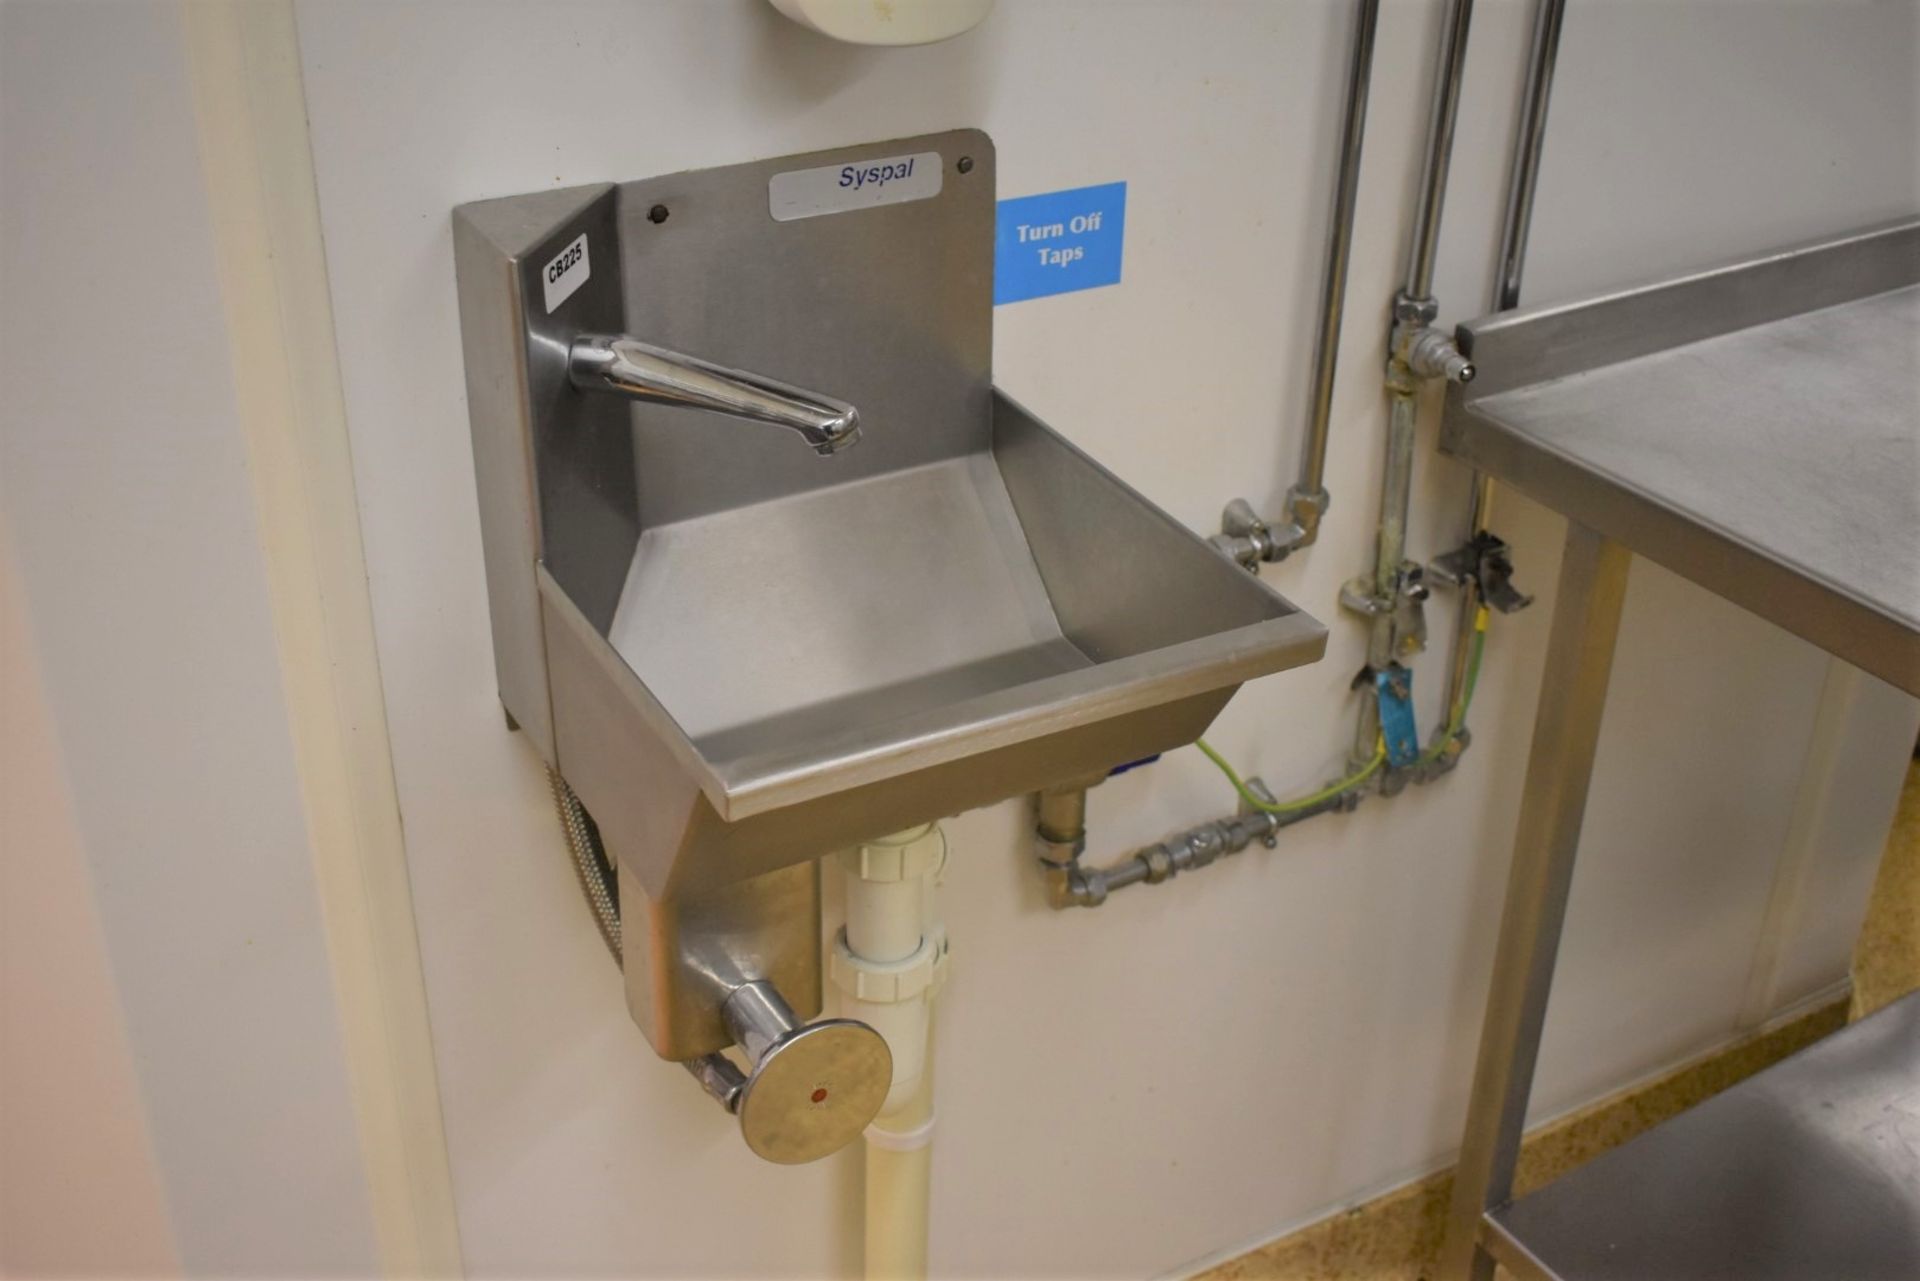 1 x Knee Operated Commercial Hand Wash Sink Basin by Syspal - Stainless Steel Construction With Knee - Image 2 of 2